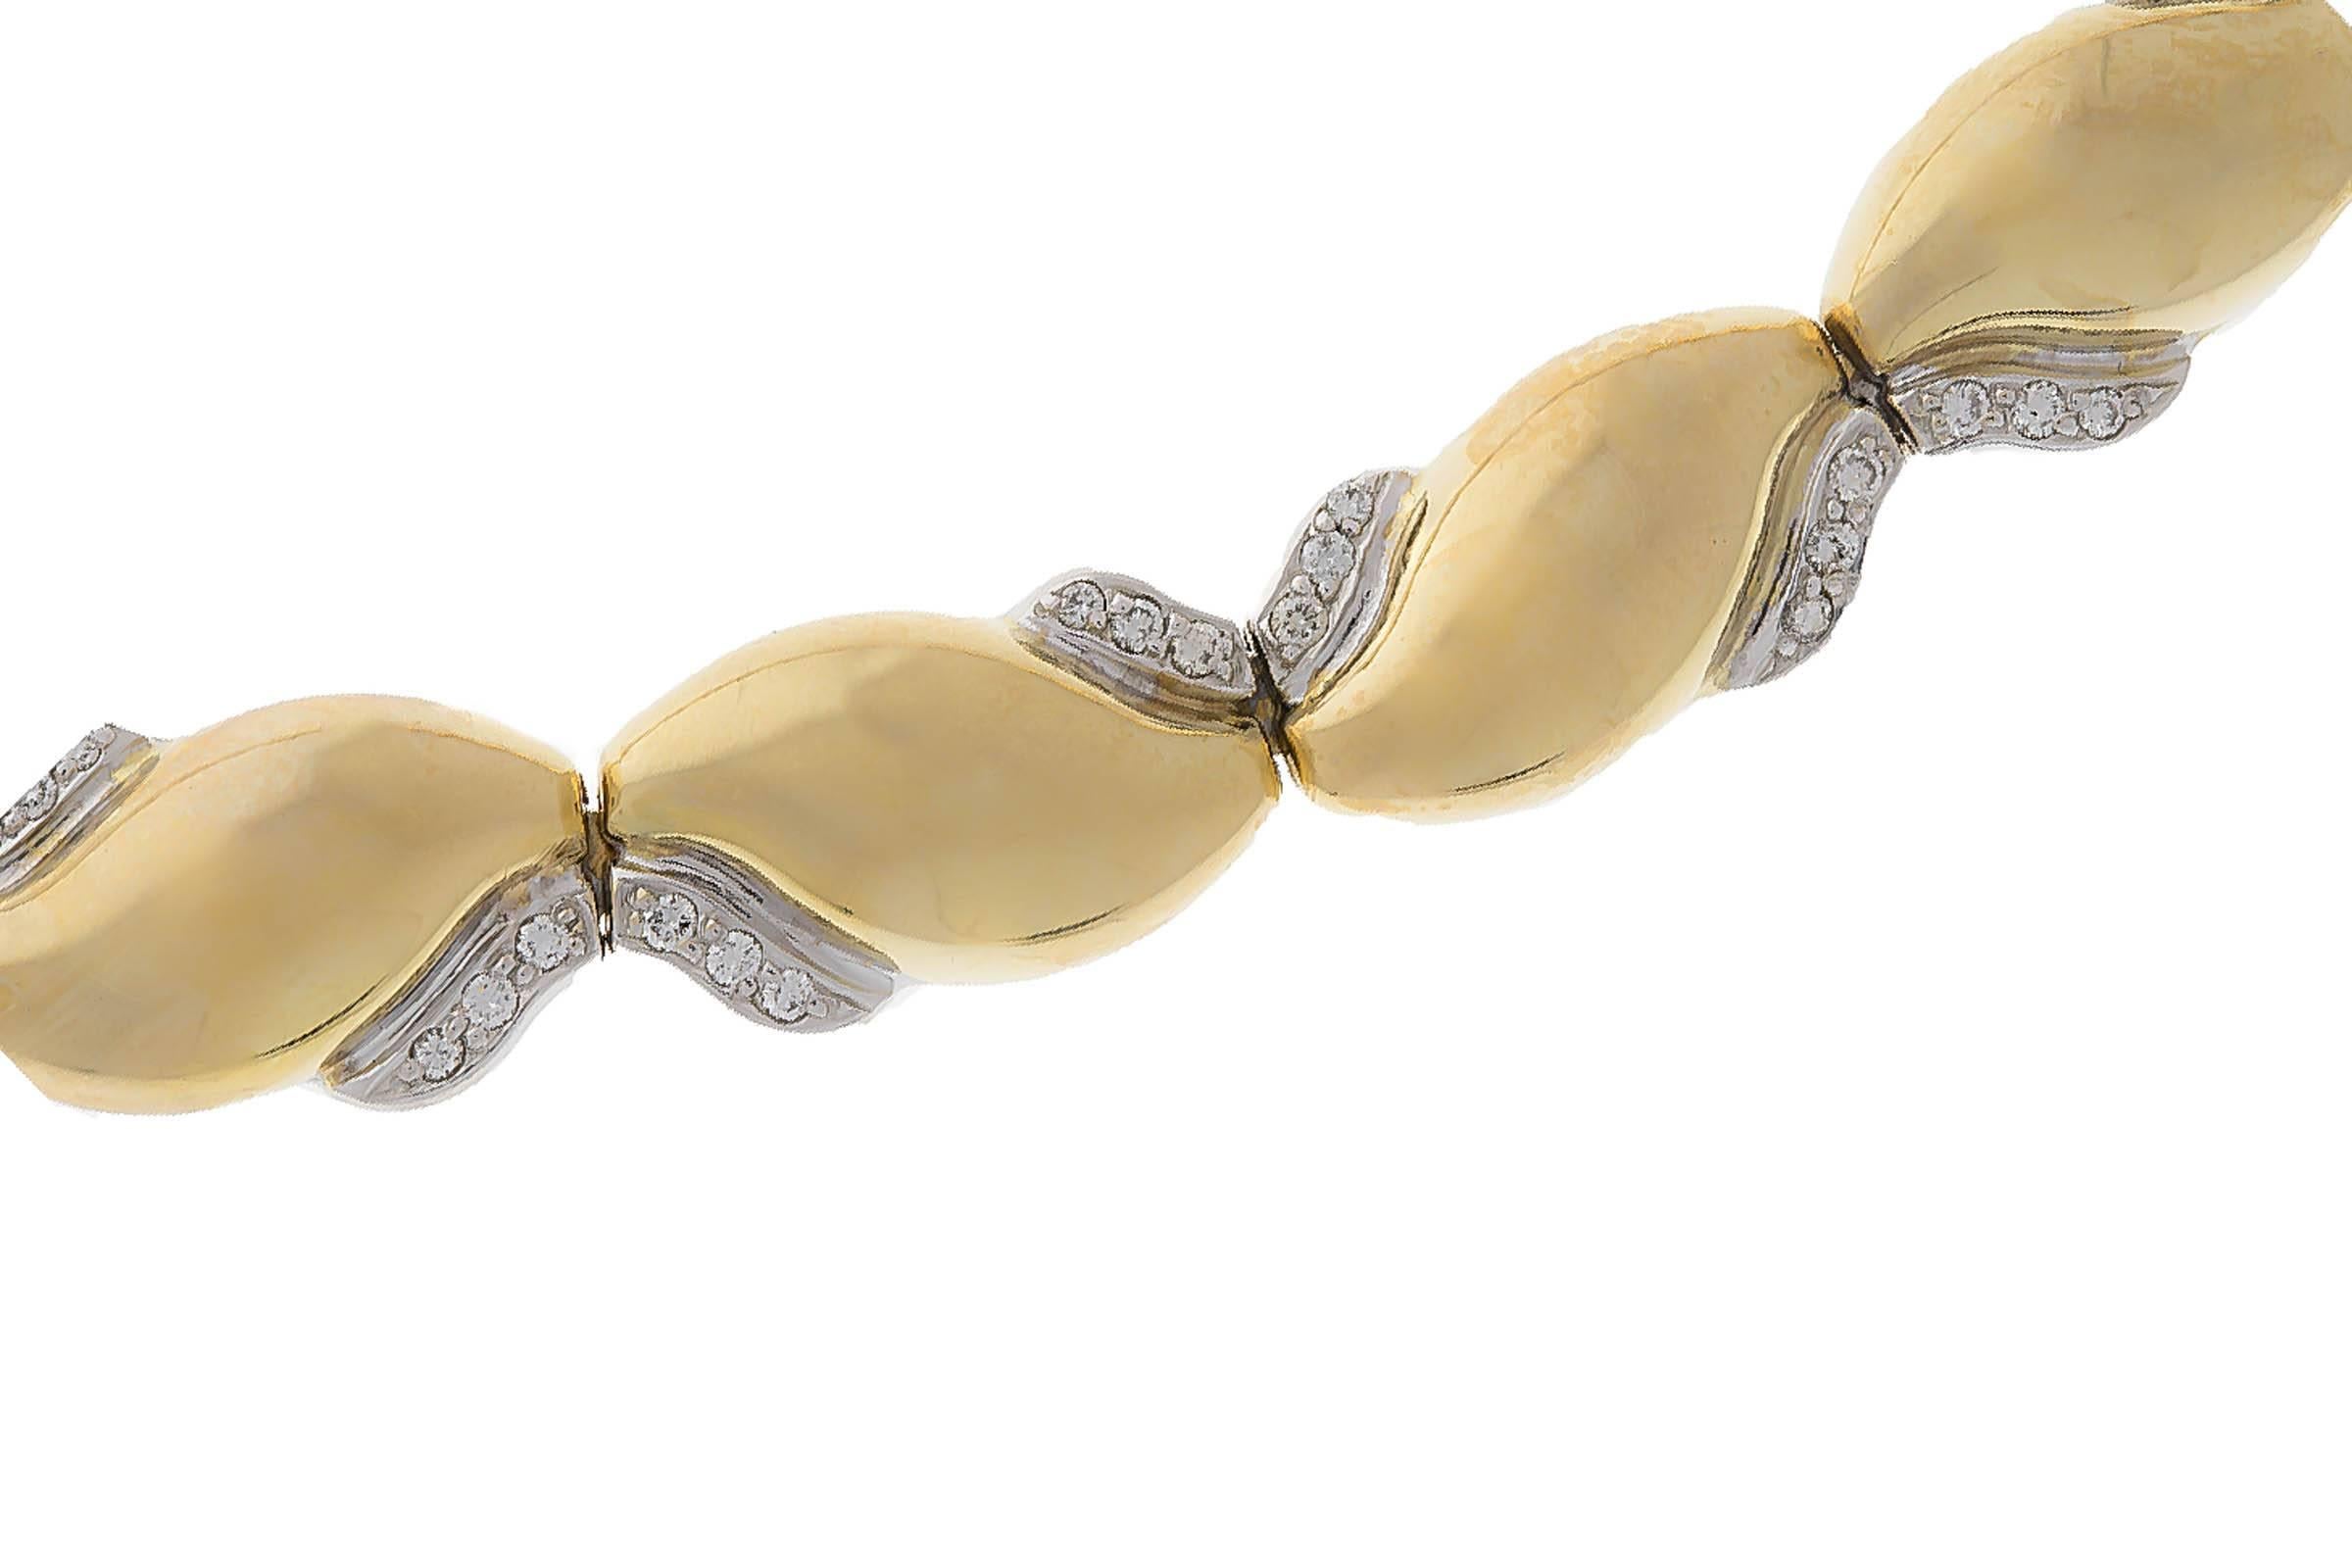 18K gold choker necklace with pave set diamond sections. The diamonds weighs combined 0.72 carat, G color, VS clarity.
